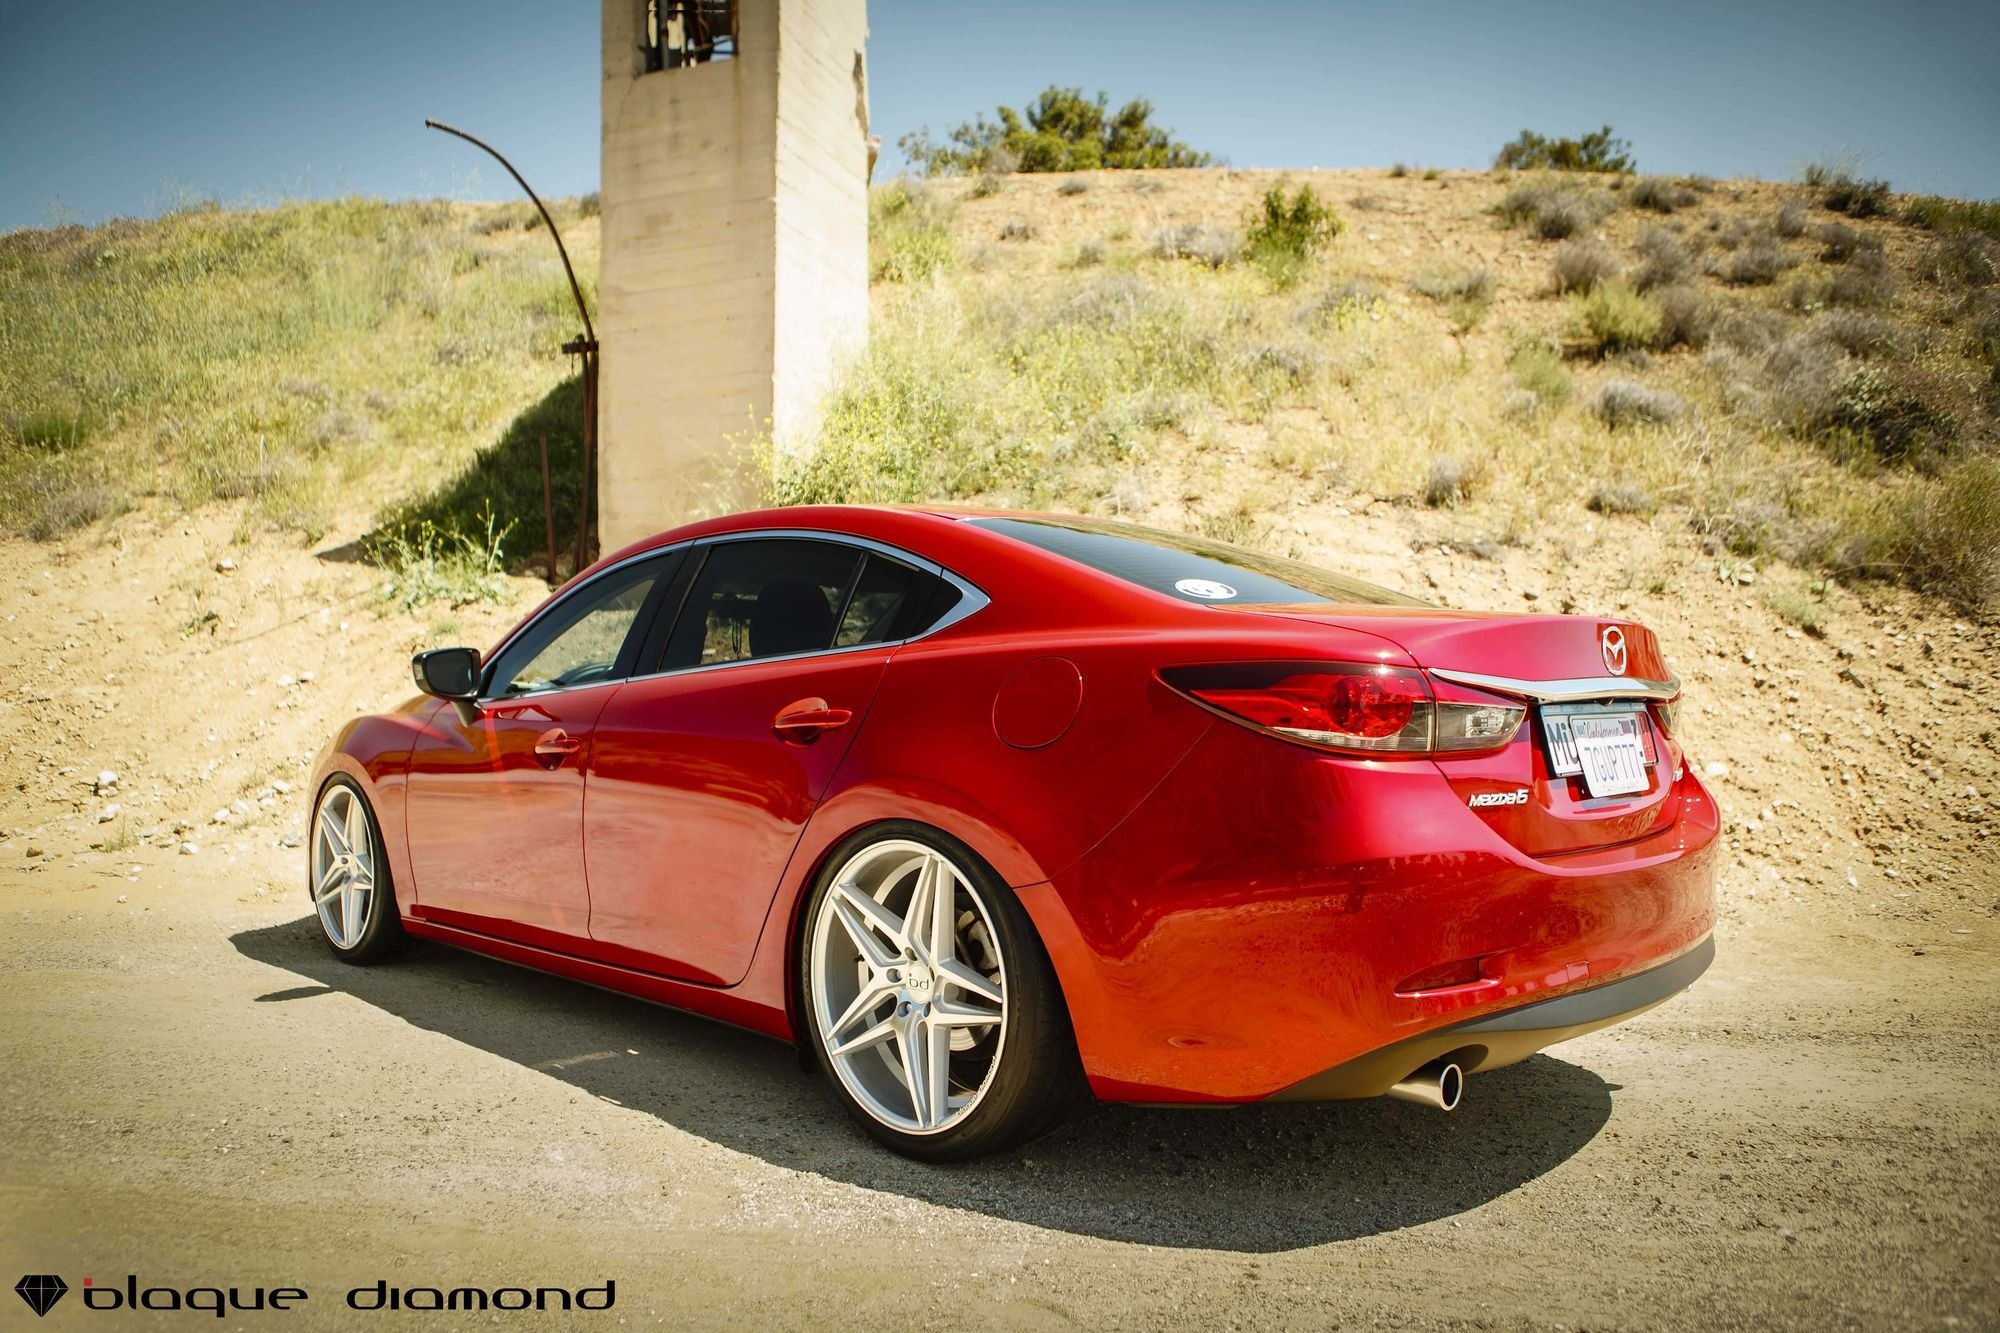 Aftermarket Rear Diffuser on Red Mazda 6 - Photo by Blaque Diamond